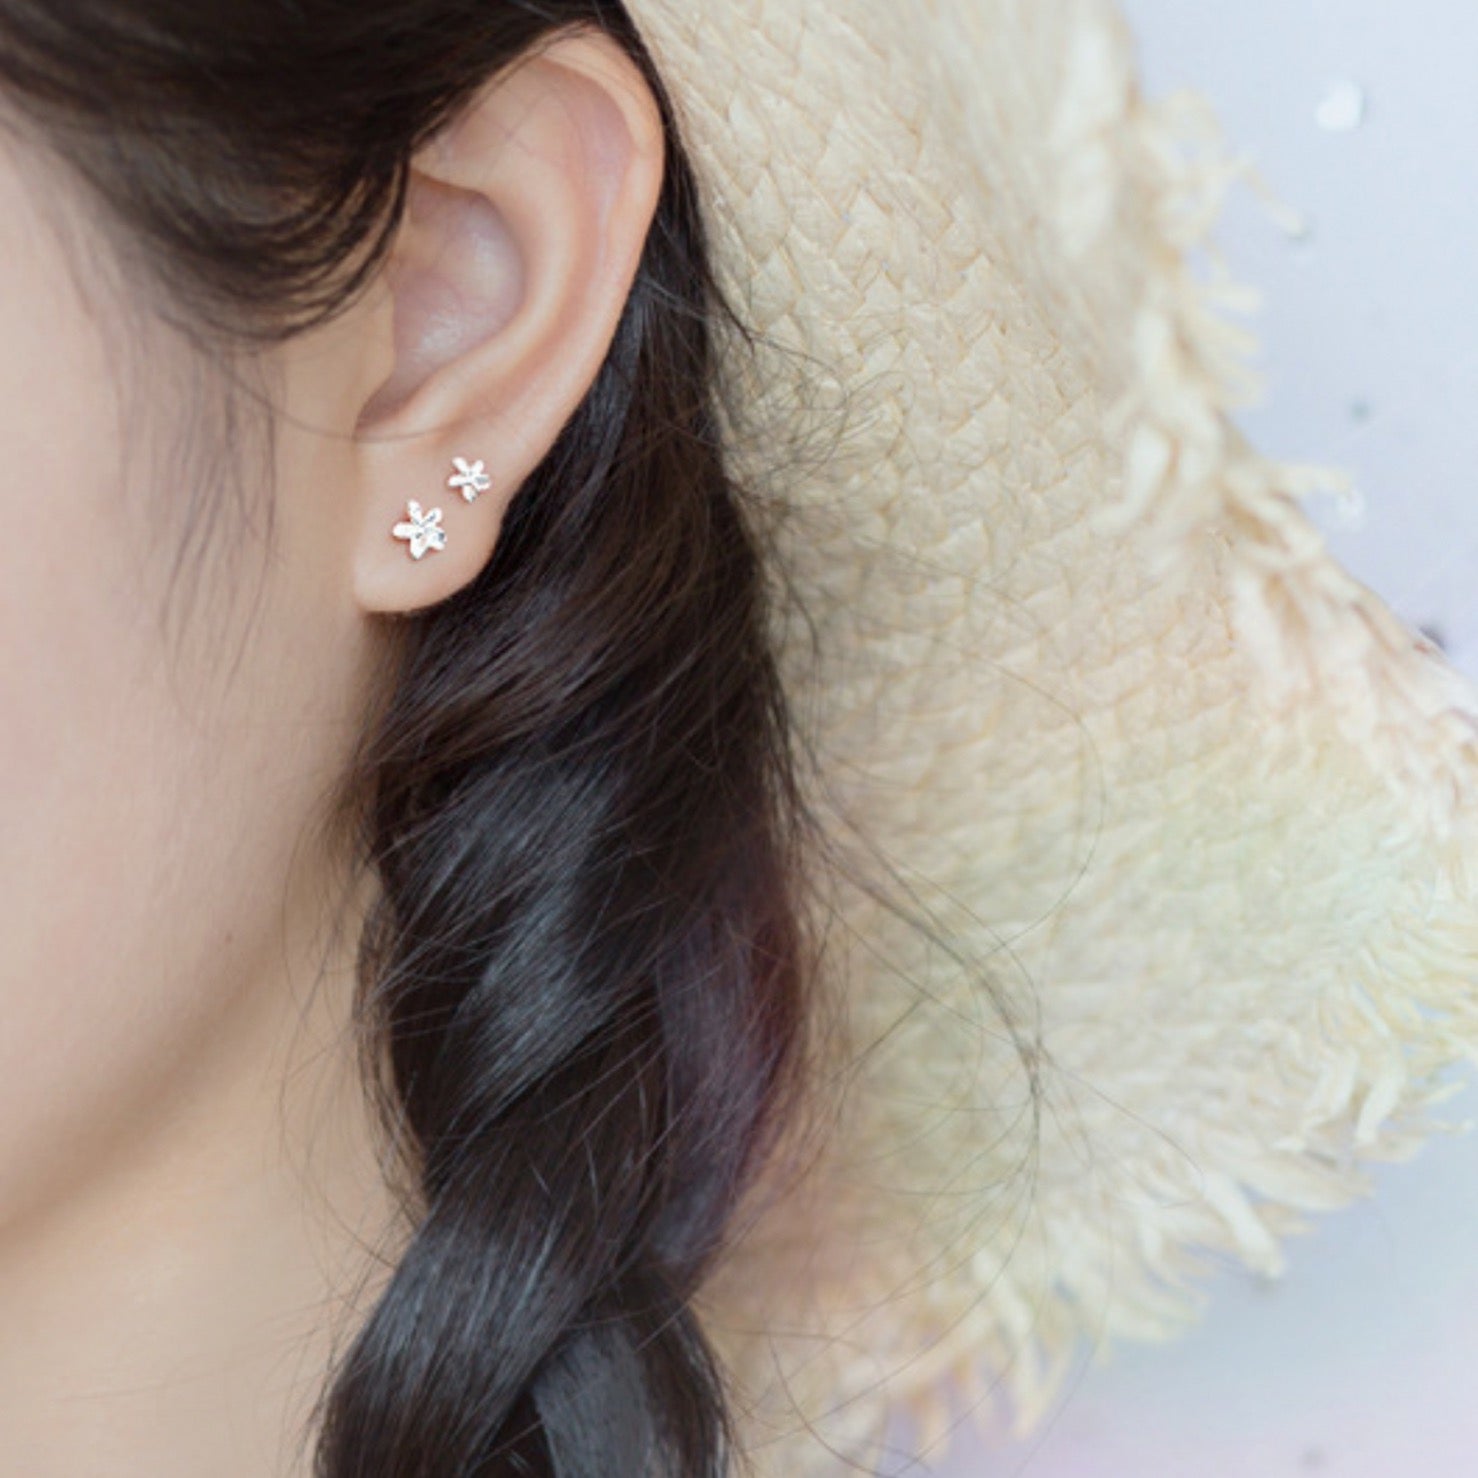 Model wearing two silver flower stud earrings in one ear, they are in two size options.